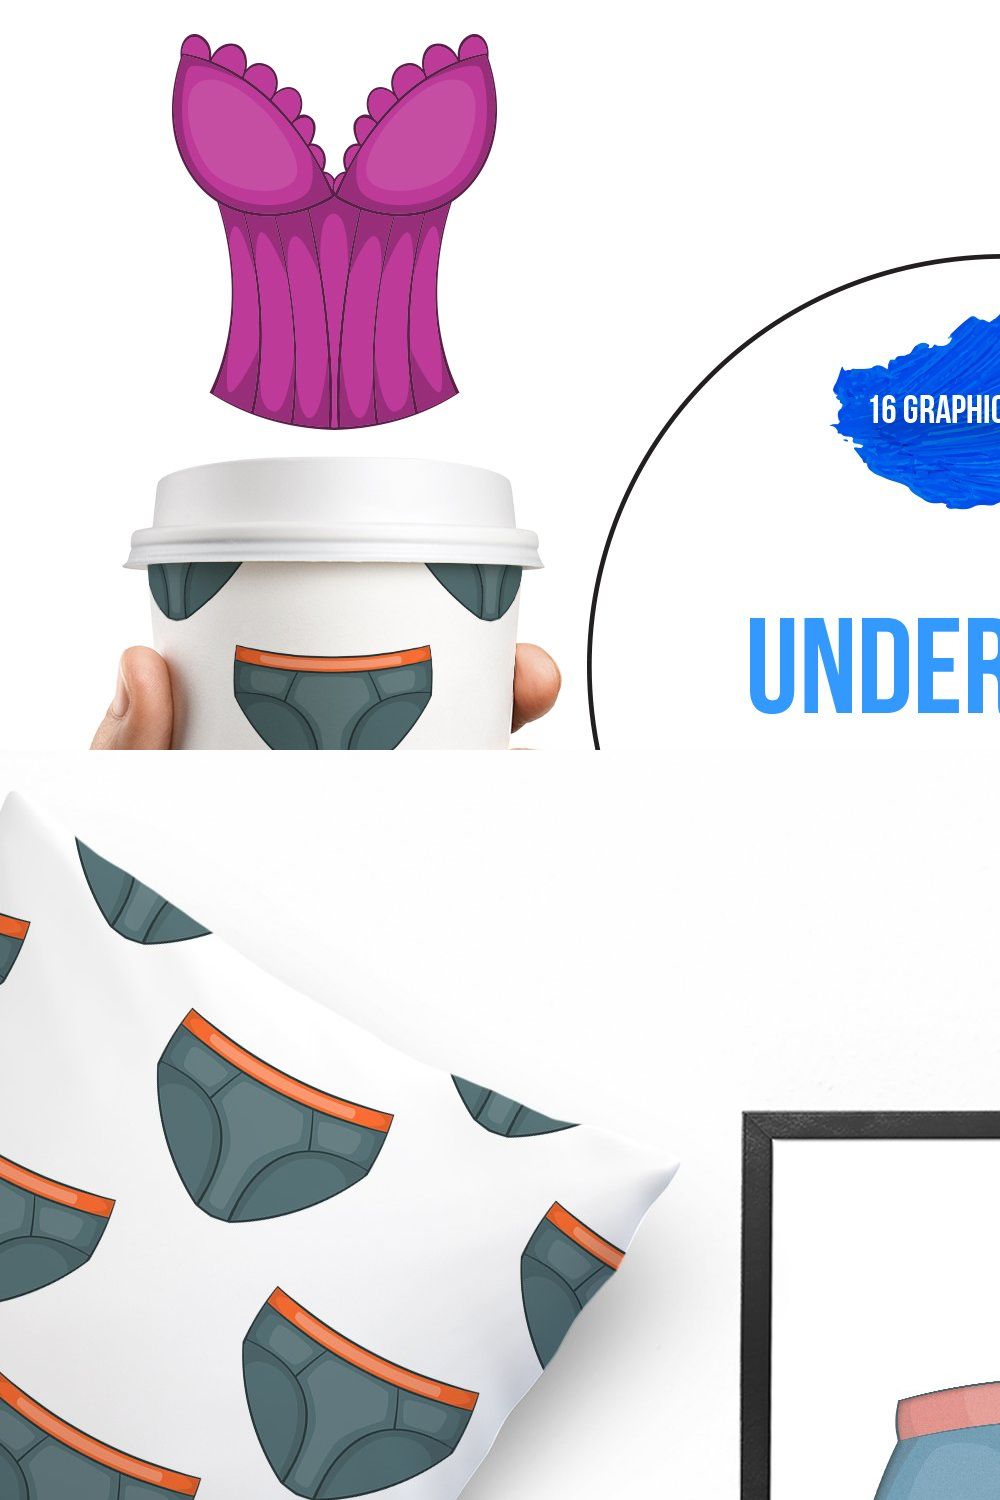 Underwear icons set, cartoon style pinterest preview image.